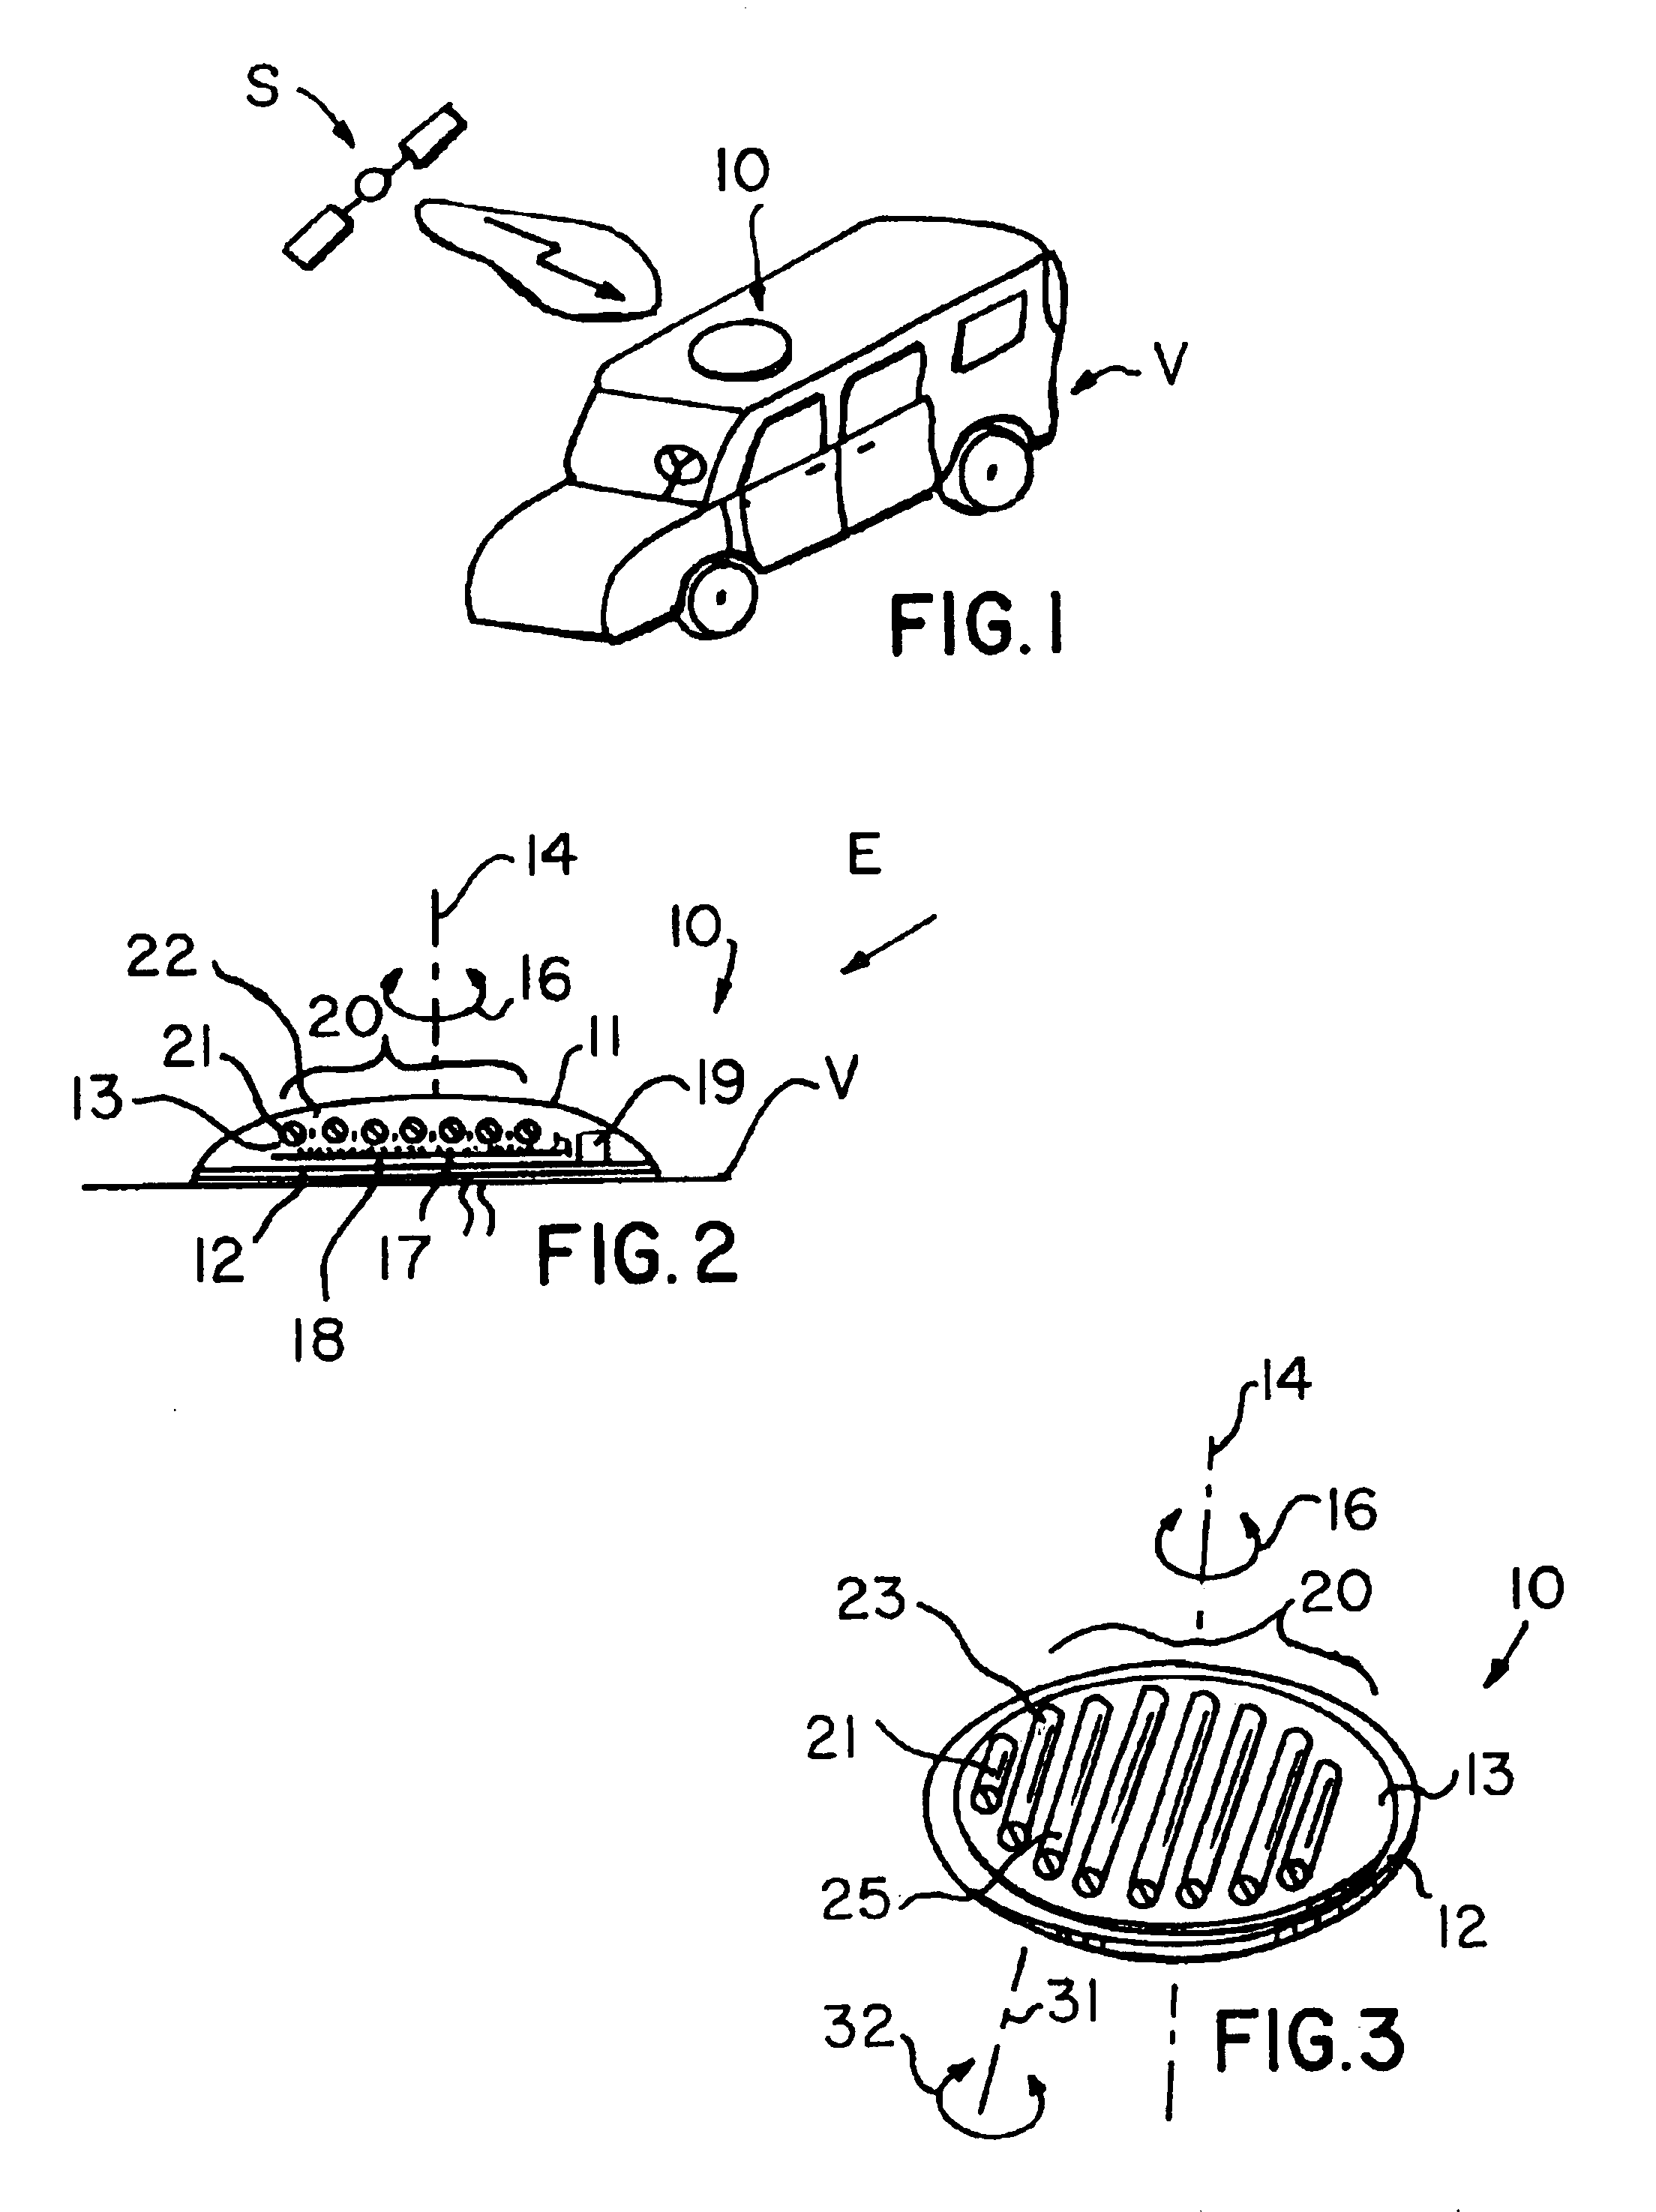 Antenna array for moving vehicles